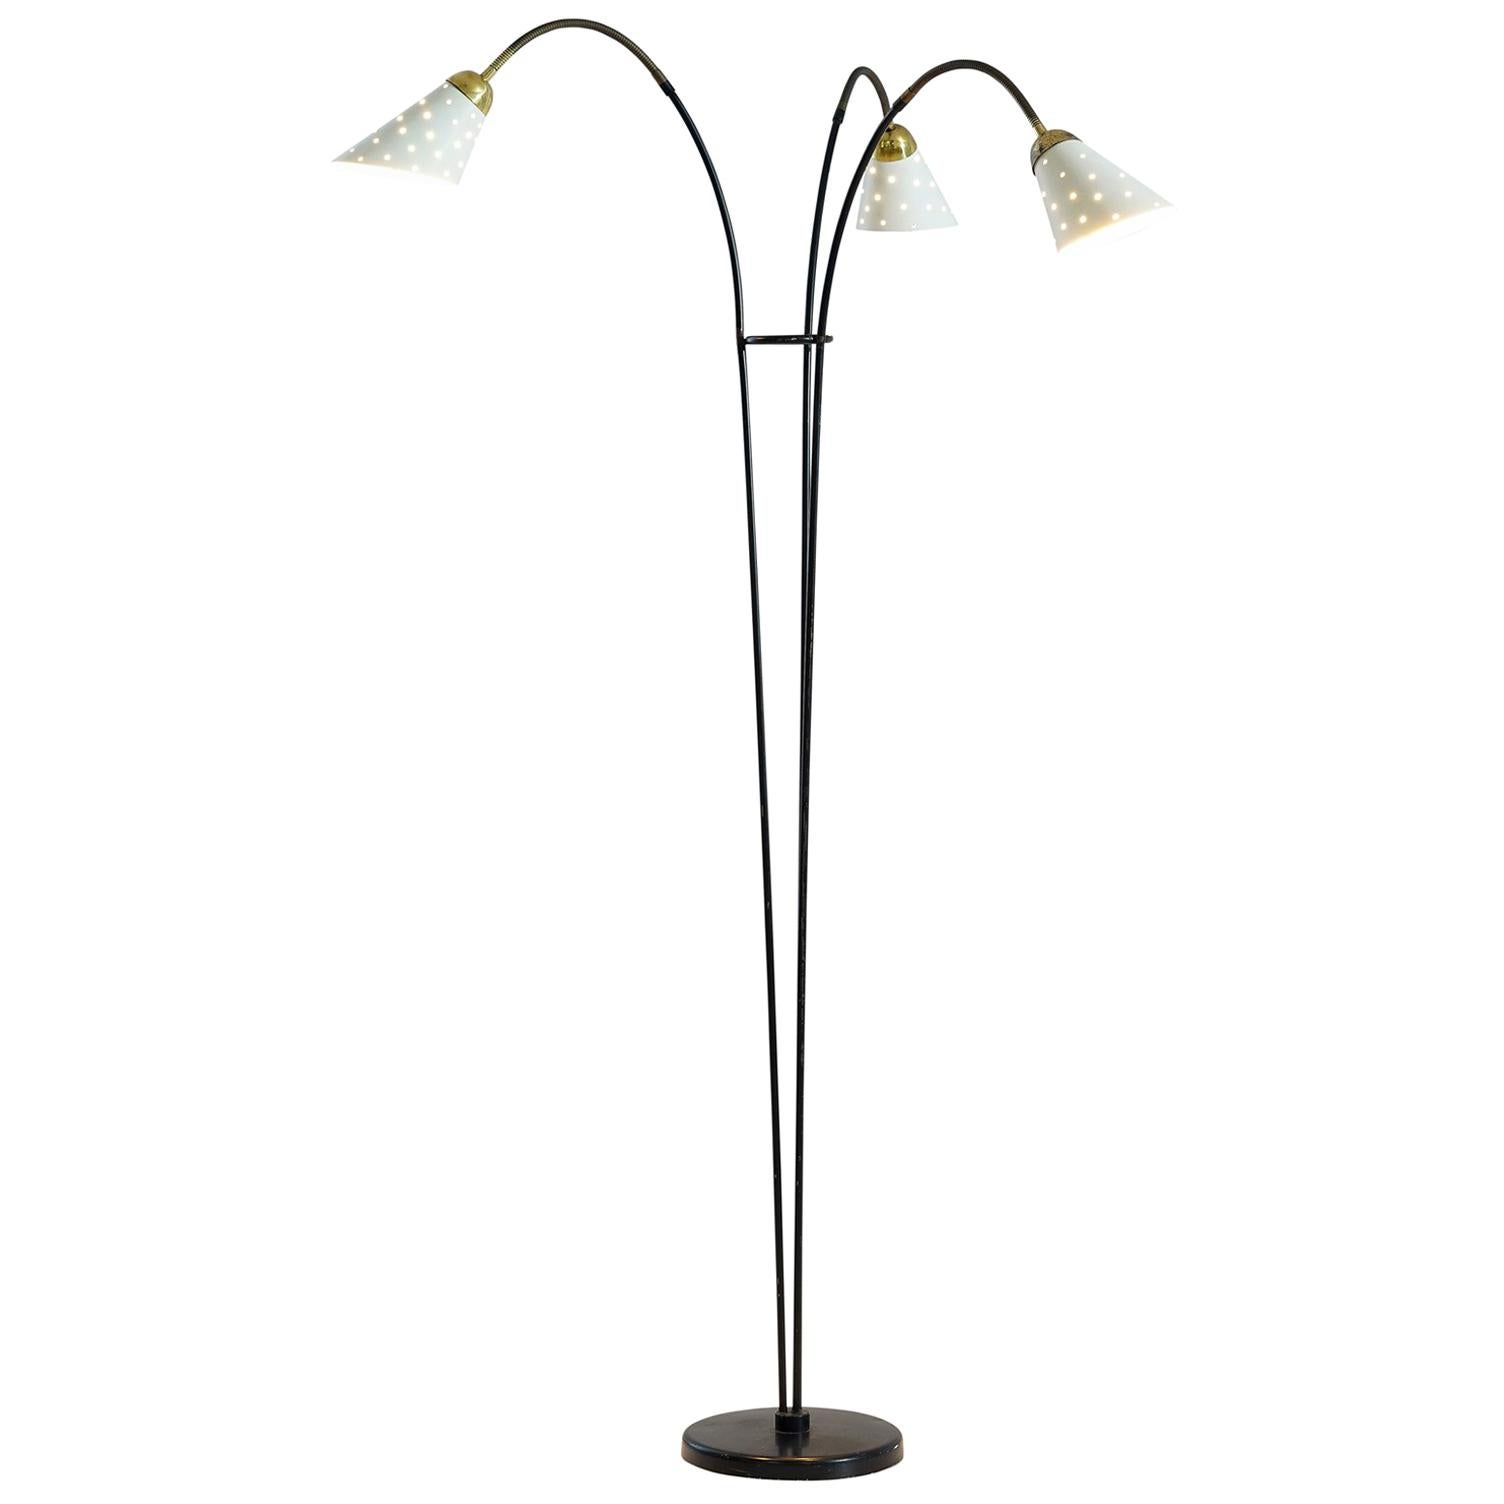 Italy Floor Lamp with White Shades Brass, 1950s